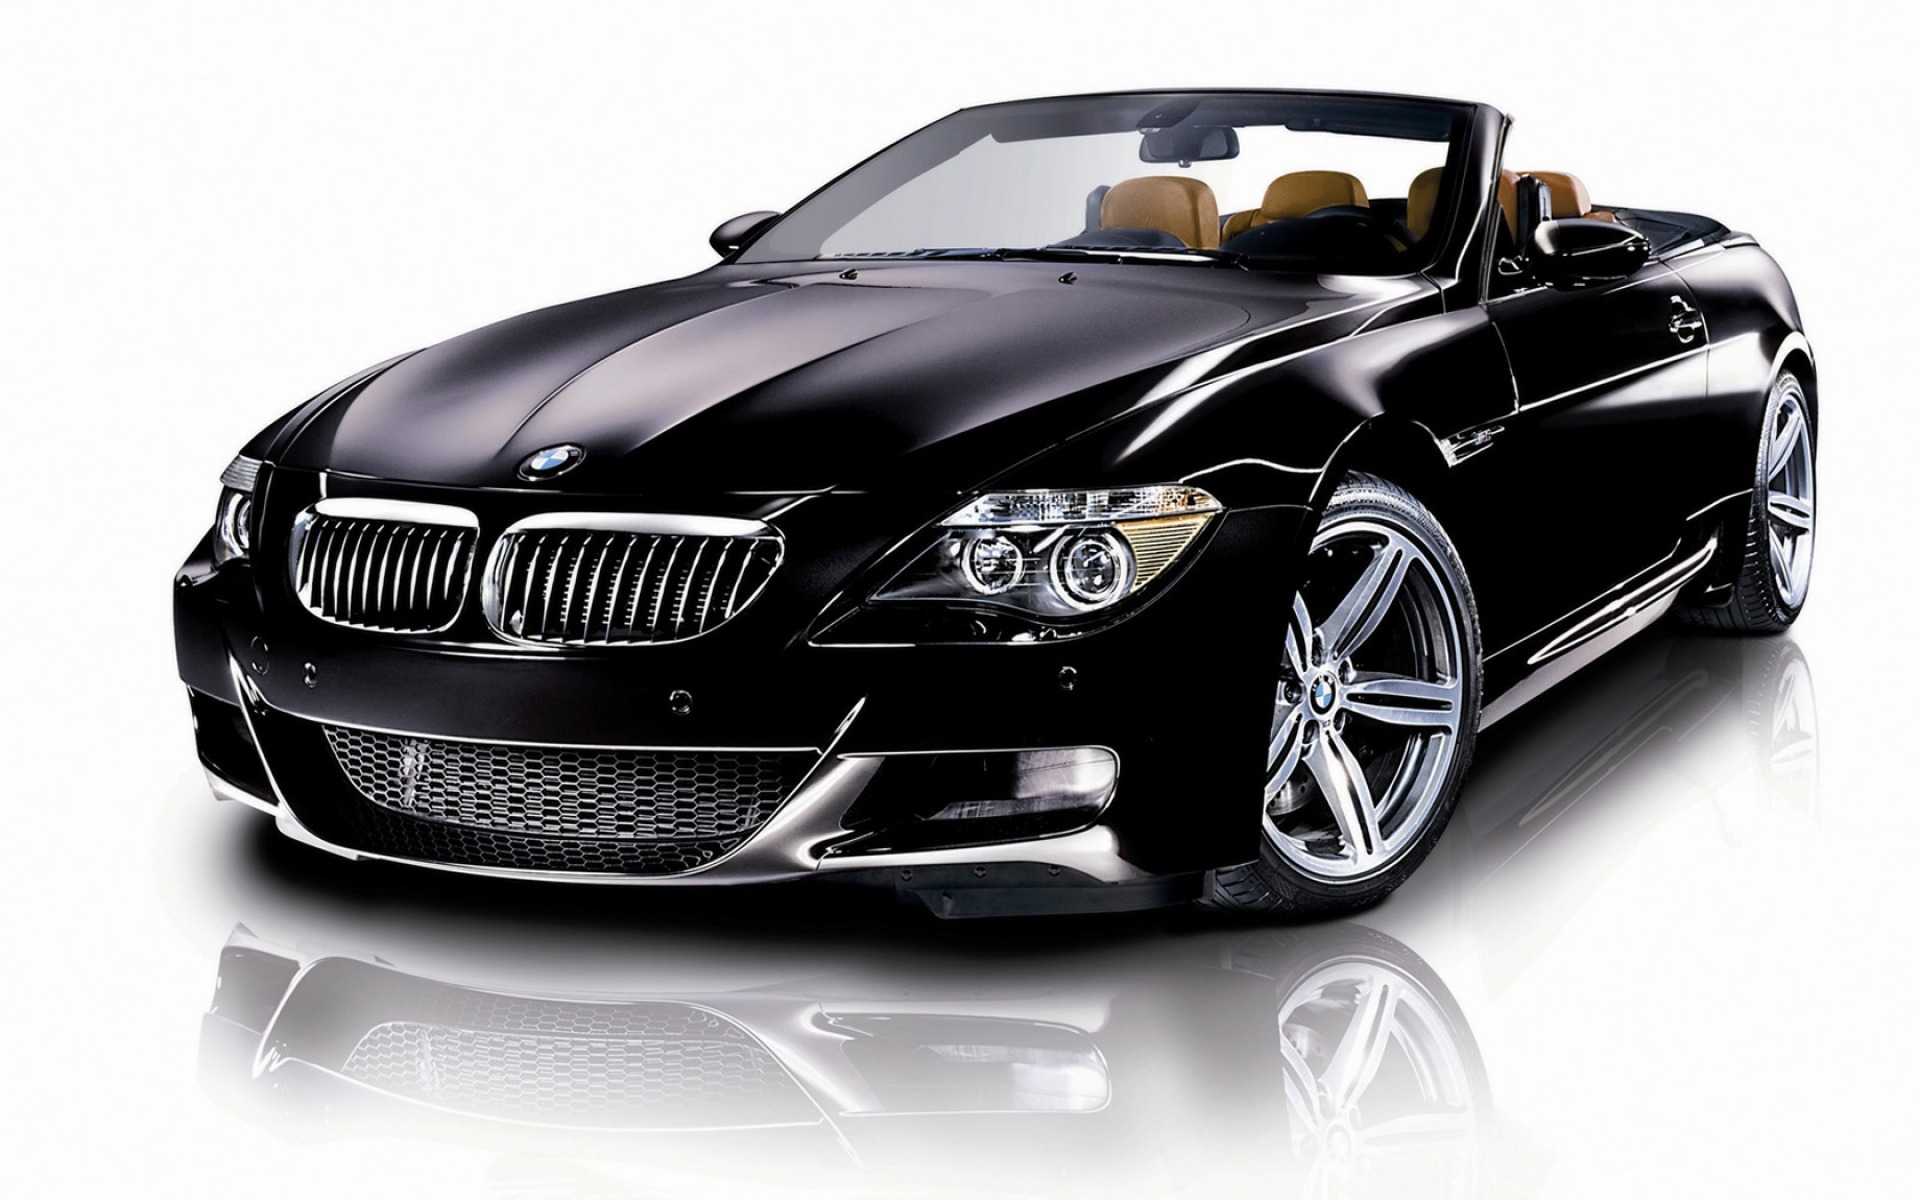 Free Download Download Bmw M6 Convertible Wallpaper Bmw Cars Wallpapers In 19x10 For Your Desktop Mobile Tablet Explore 37 Open Car Wallpapers Open Background Wallpaper Open Doors Wallpapers Open Field Wallpaper